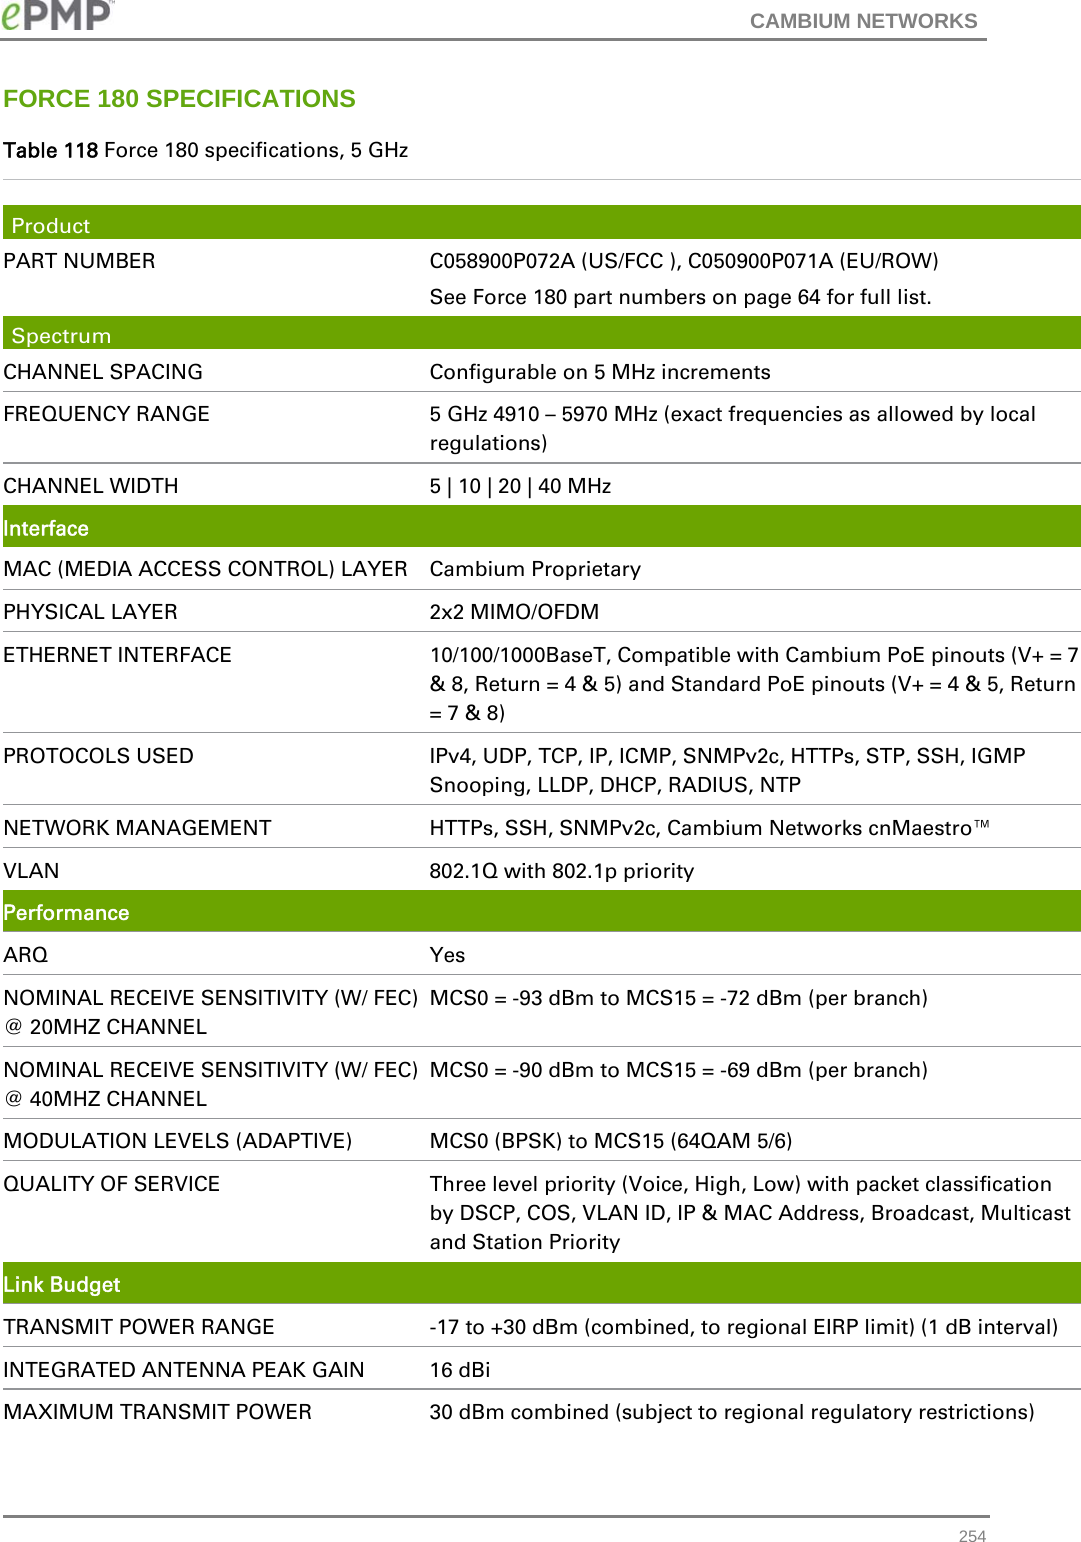 CAMBIUM NETWORKS   254FORCE 180 SPECIFICATIONS Table 118 Force 180 specifications, 5 GHz  Product PART NUMBER  C058900P072A (US/FCC ), C050900P071A (EU/ROW) See Force 180 part numbers on page 64 for full list. Spectrum CHANNEL SPACING  Configurable on 5 MHz increments FREQUENCY RANGE  5 GHz 4910 – 5970 MHz (exact frequencies as allowed by local regulations)  CHANNEL WIDTH  5 | 10 | 20 | 40 MHz   Interface MAC (MEDIA ACCESS CONTROL) LAYER  Cambium Proprietary PHYSICAL LAYER  2x2 MIMO/OFDM ETHERNET INTERFACE  10/100/1000BaseT, Compatible with Cambium PoE pinouts (V+ = 7 &amp; 8, Return = 4 &amp; 5) and Standard PoE pinouts (V+ = 4 &amp; 5, Return = 7 &amp; 8) PROTOCOLS USED  IPv4, UDP, TCP, IP, ICMP, SNMPv2c, HTTPs, STP, SSH, IGMP Snooping, LLDP, DHCP, RADIUS, NTP  NETWORK MANAGEMENT  HTTPs, SSH, SNMPv2c, Cambium Networks cnMaestro™ VLAN  802.1Q with 802.1p priority Performance ARQ Yes NOMINAL RECEIVE SENSITIVITY (W/ FEC) @ 20MHZ CHANNEL MCS0 = -93 dBm to MCS15 = -72 dBm (per branch) NOMINAL RECEIVE SENSITIVITY (W/ FEC) @ 40MHZ CHANNEL MCS0 = -90 dBm to MCS15 = -69 dBm (per branch) MODULATION LEVELS (ADAPTIVE)  MCS0 (BPSK) to MCS15 (64QAM 5/6) QUALITY OF SERVICE  Three level priority (Voice, High, Low) with packet classification by DSCP, COS, VLAN ID, IP &amp; MAC Address, Broadcast, Multicast and Station Priority Link Budget TRANSMIT POWER RANGE  -17 to +30 dBm (combined, to regional EIRP limit) (1 dB interval) INTEGRATED ANTENNA PEAK GAIN  16 dBi MAXIMUM TRANSMIT POWER  30 dBm combined (subject to regional regulatory restrictions) 